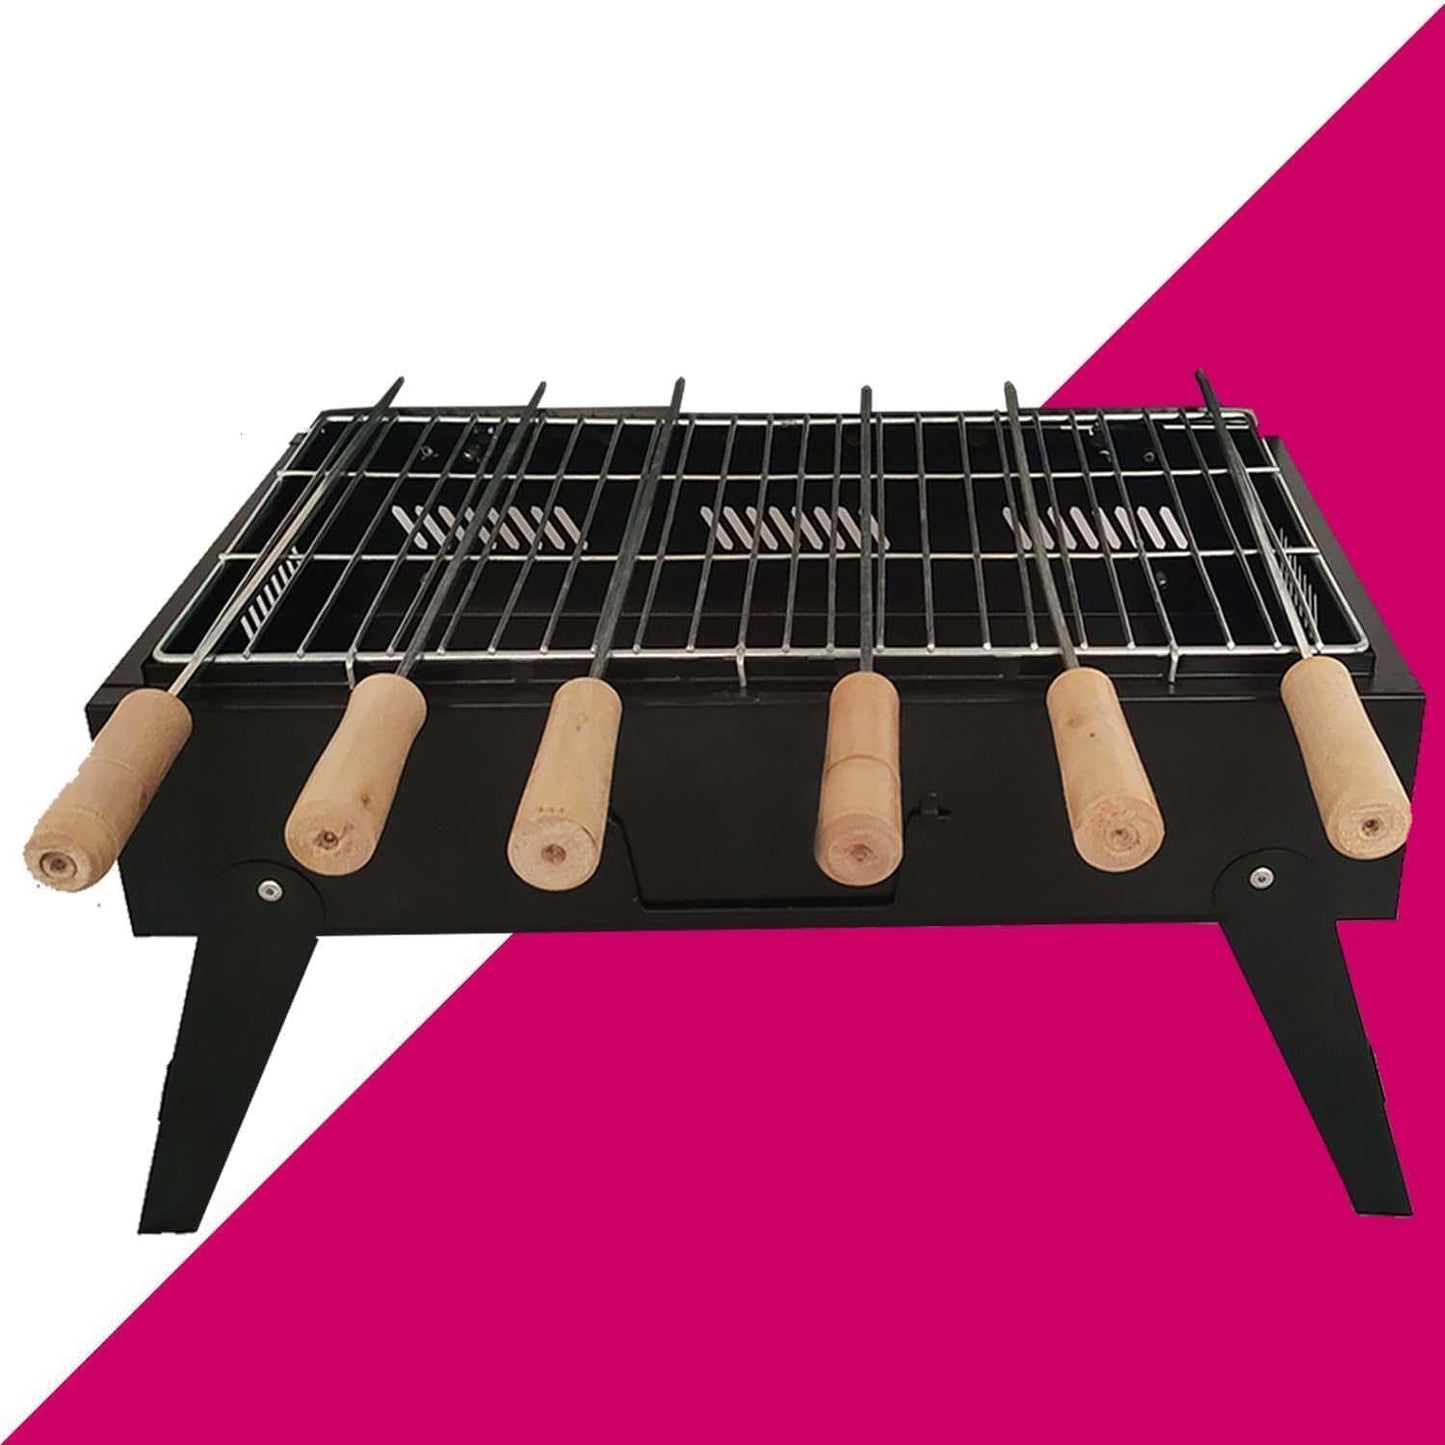 Wellberg tabletop charcoal barbeque grill set with 4 skewers - WELLBERG